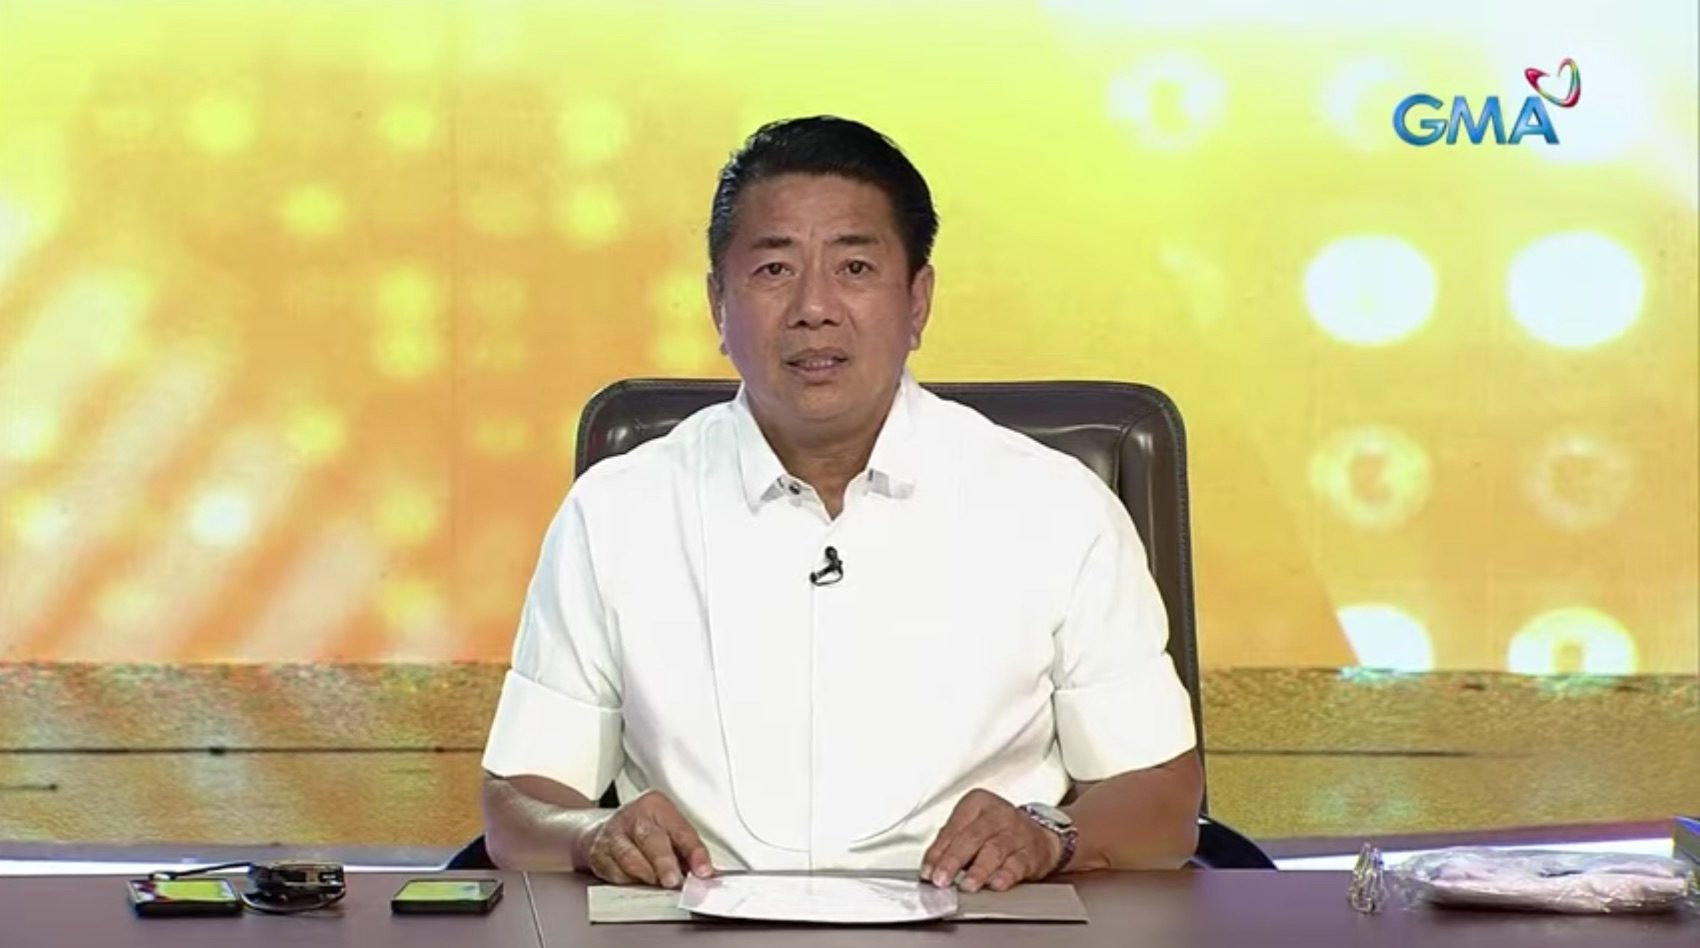 ‘For delicadeza’: Willie Revillame explains why he left GMA Network